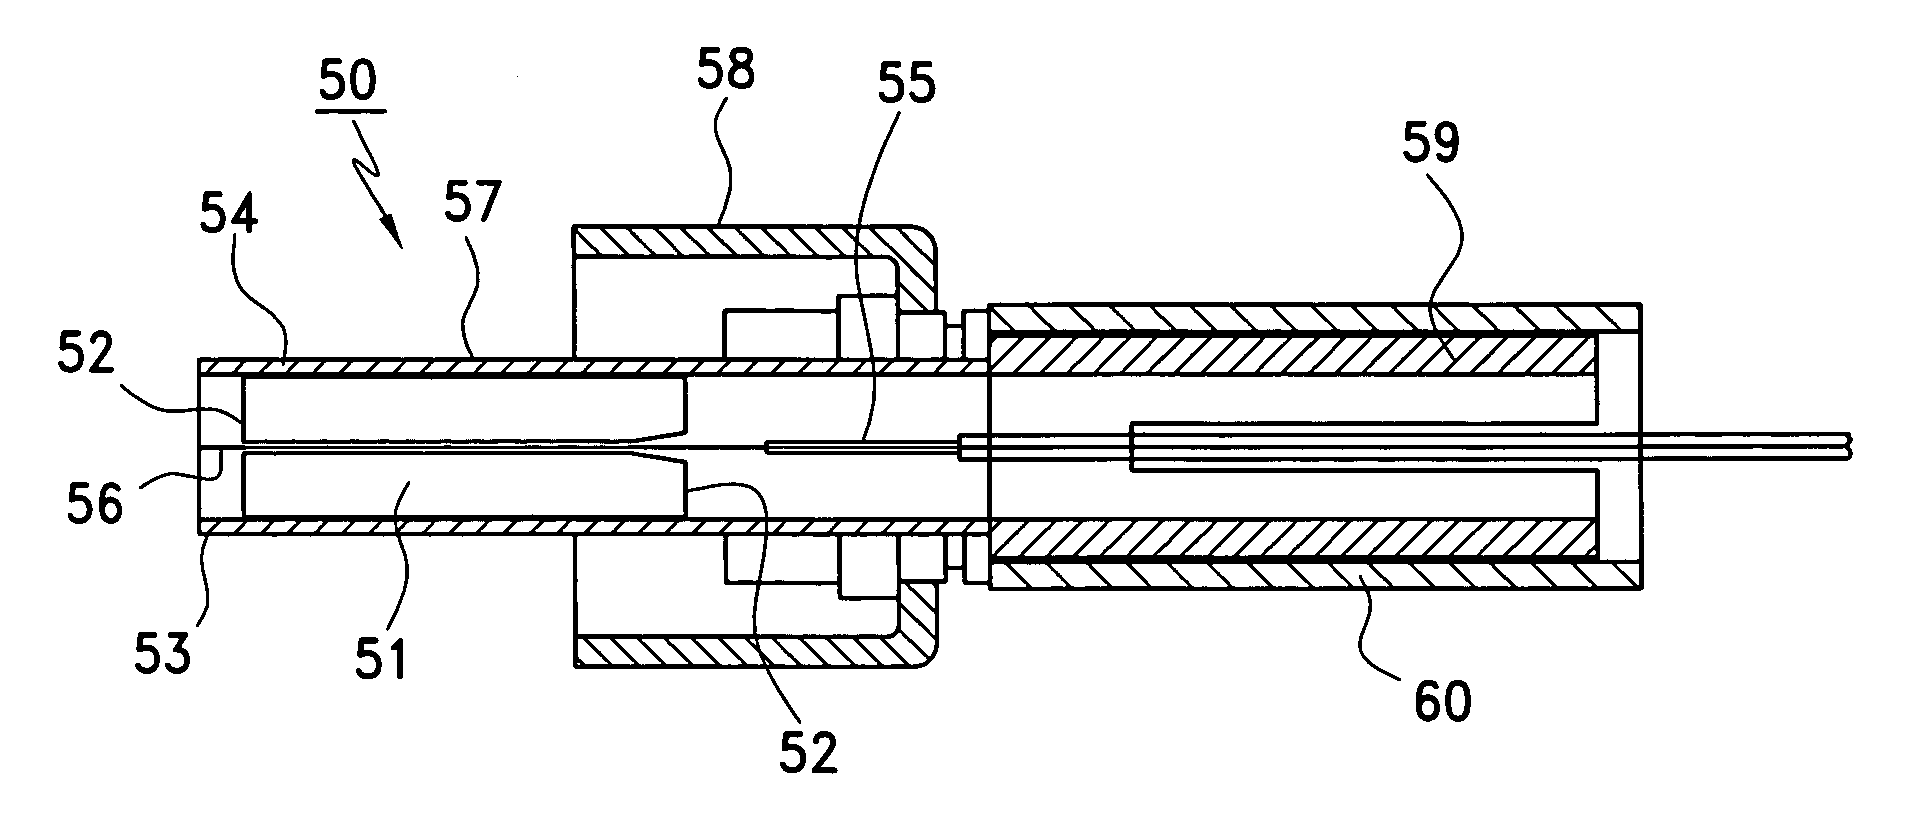 Apparatus and method for diffusing laser energy that fails to couple into small core fibers, and for reducing coupling to the cladding of the fiber